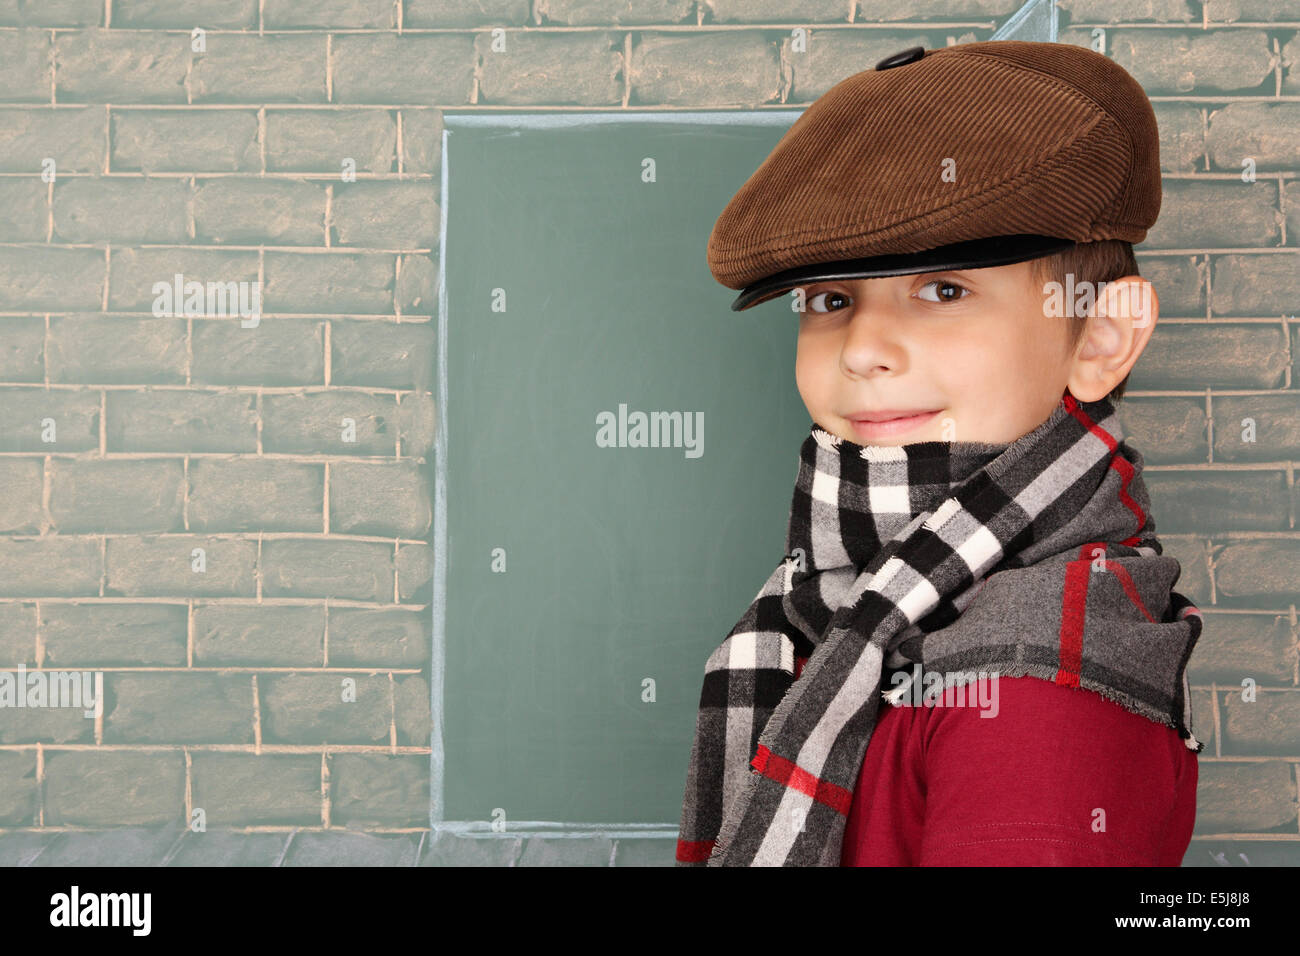 Education idea, the schoolboy before the open door represented on a chalkboard Stock Photo